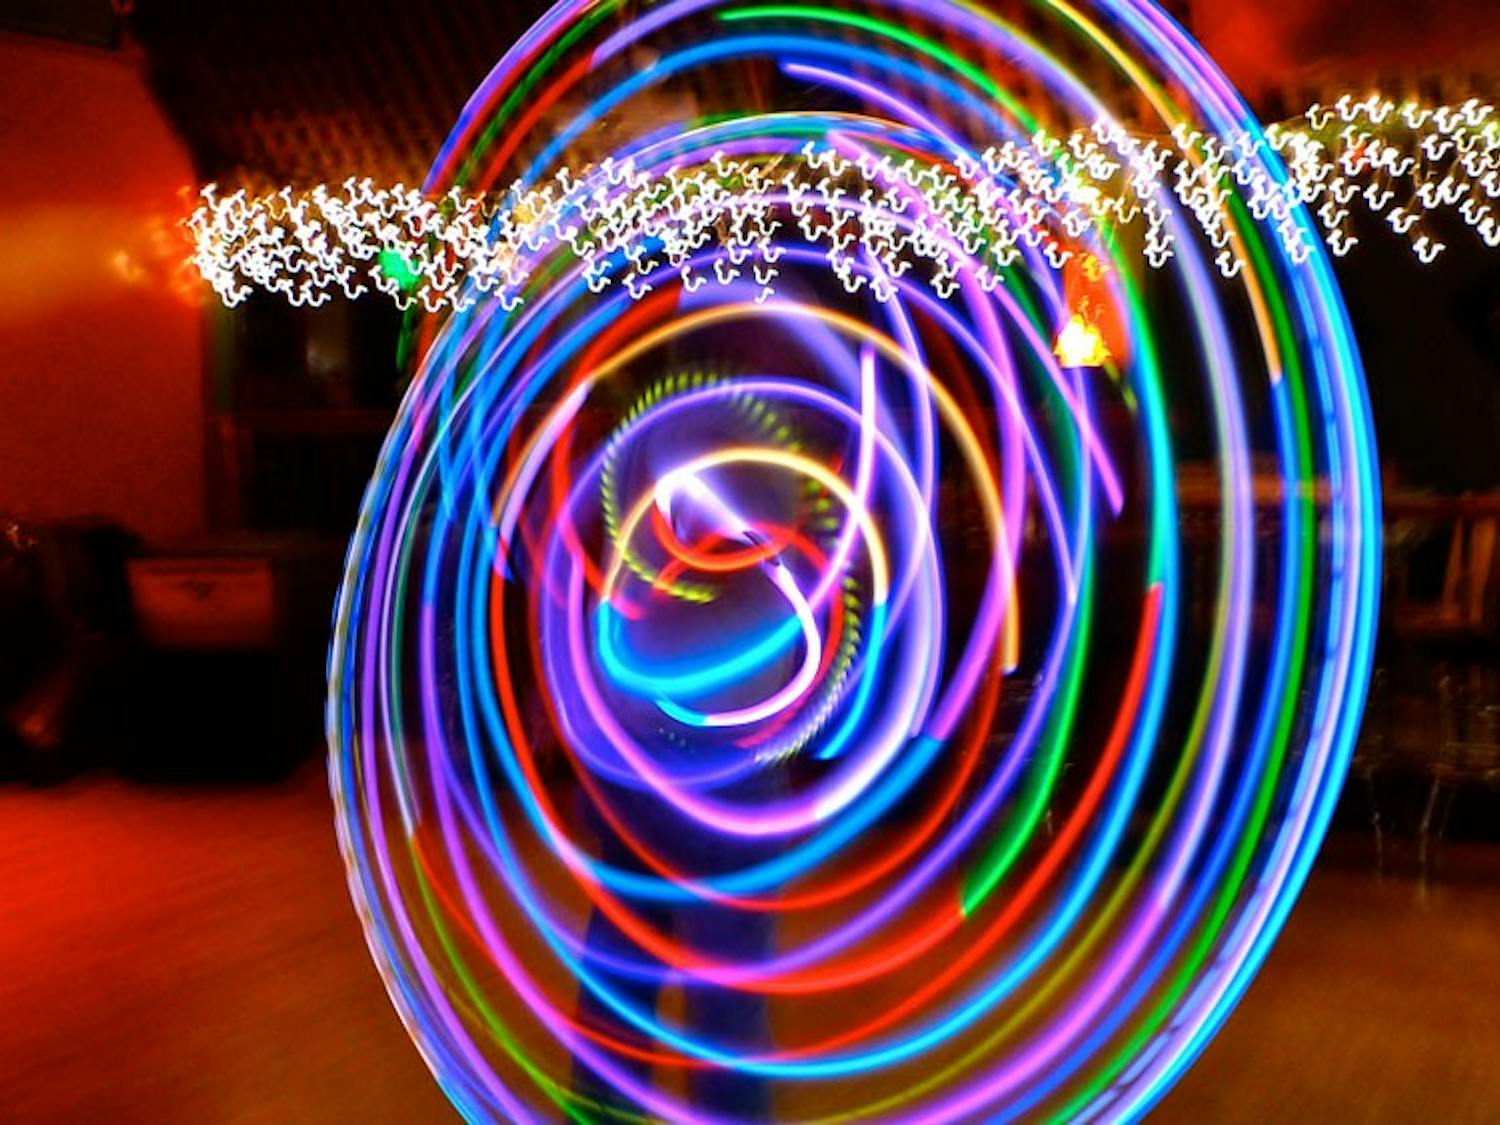 You can wind down the weekend with hula hooping at Ultra Hoop, sitting ringside to Golden Gloves Boxing at The Tralf Music Hall or tango-ing the night away at The Gypsy Parlor.